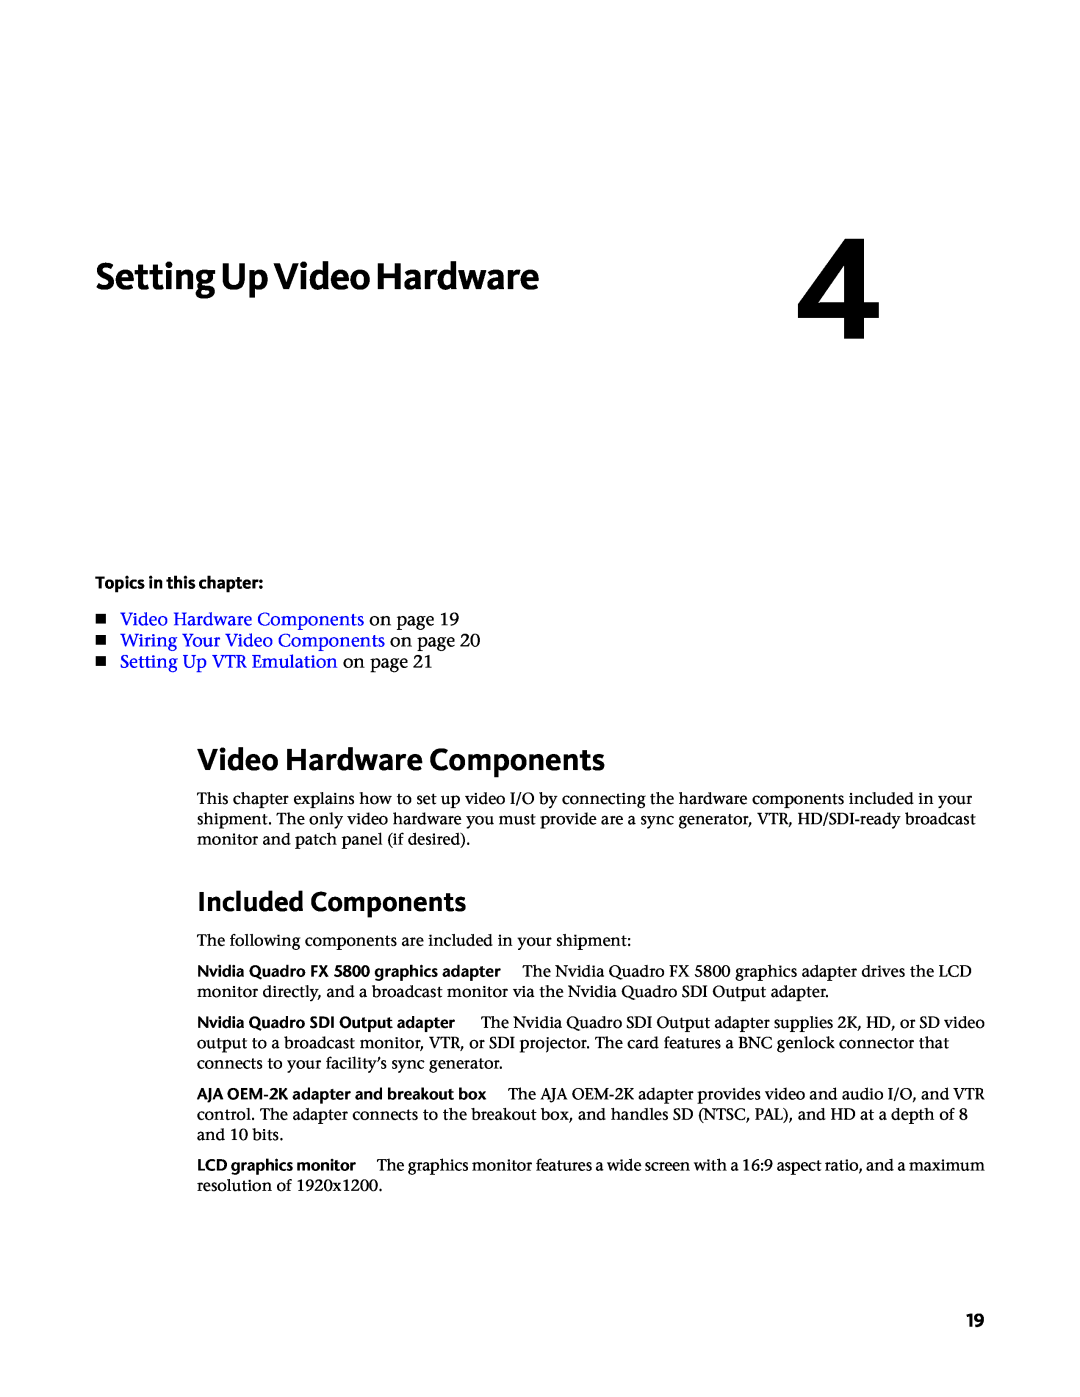 HP Z800 Setting UpVideo Hardware4, Included Components, Video Hardware Components on page, Topics in this chapter 